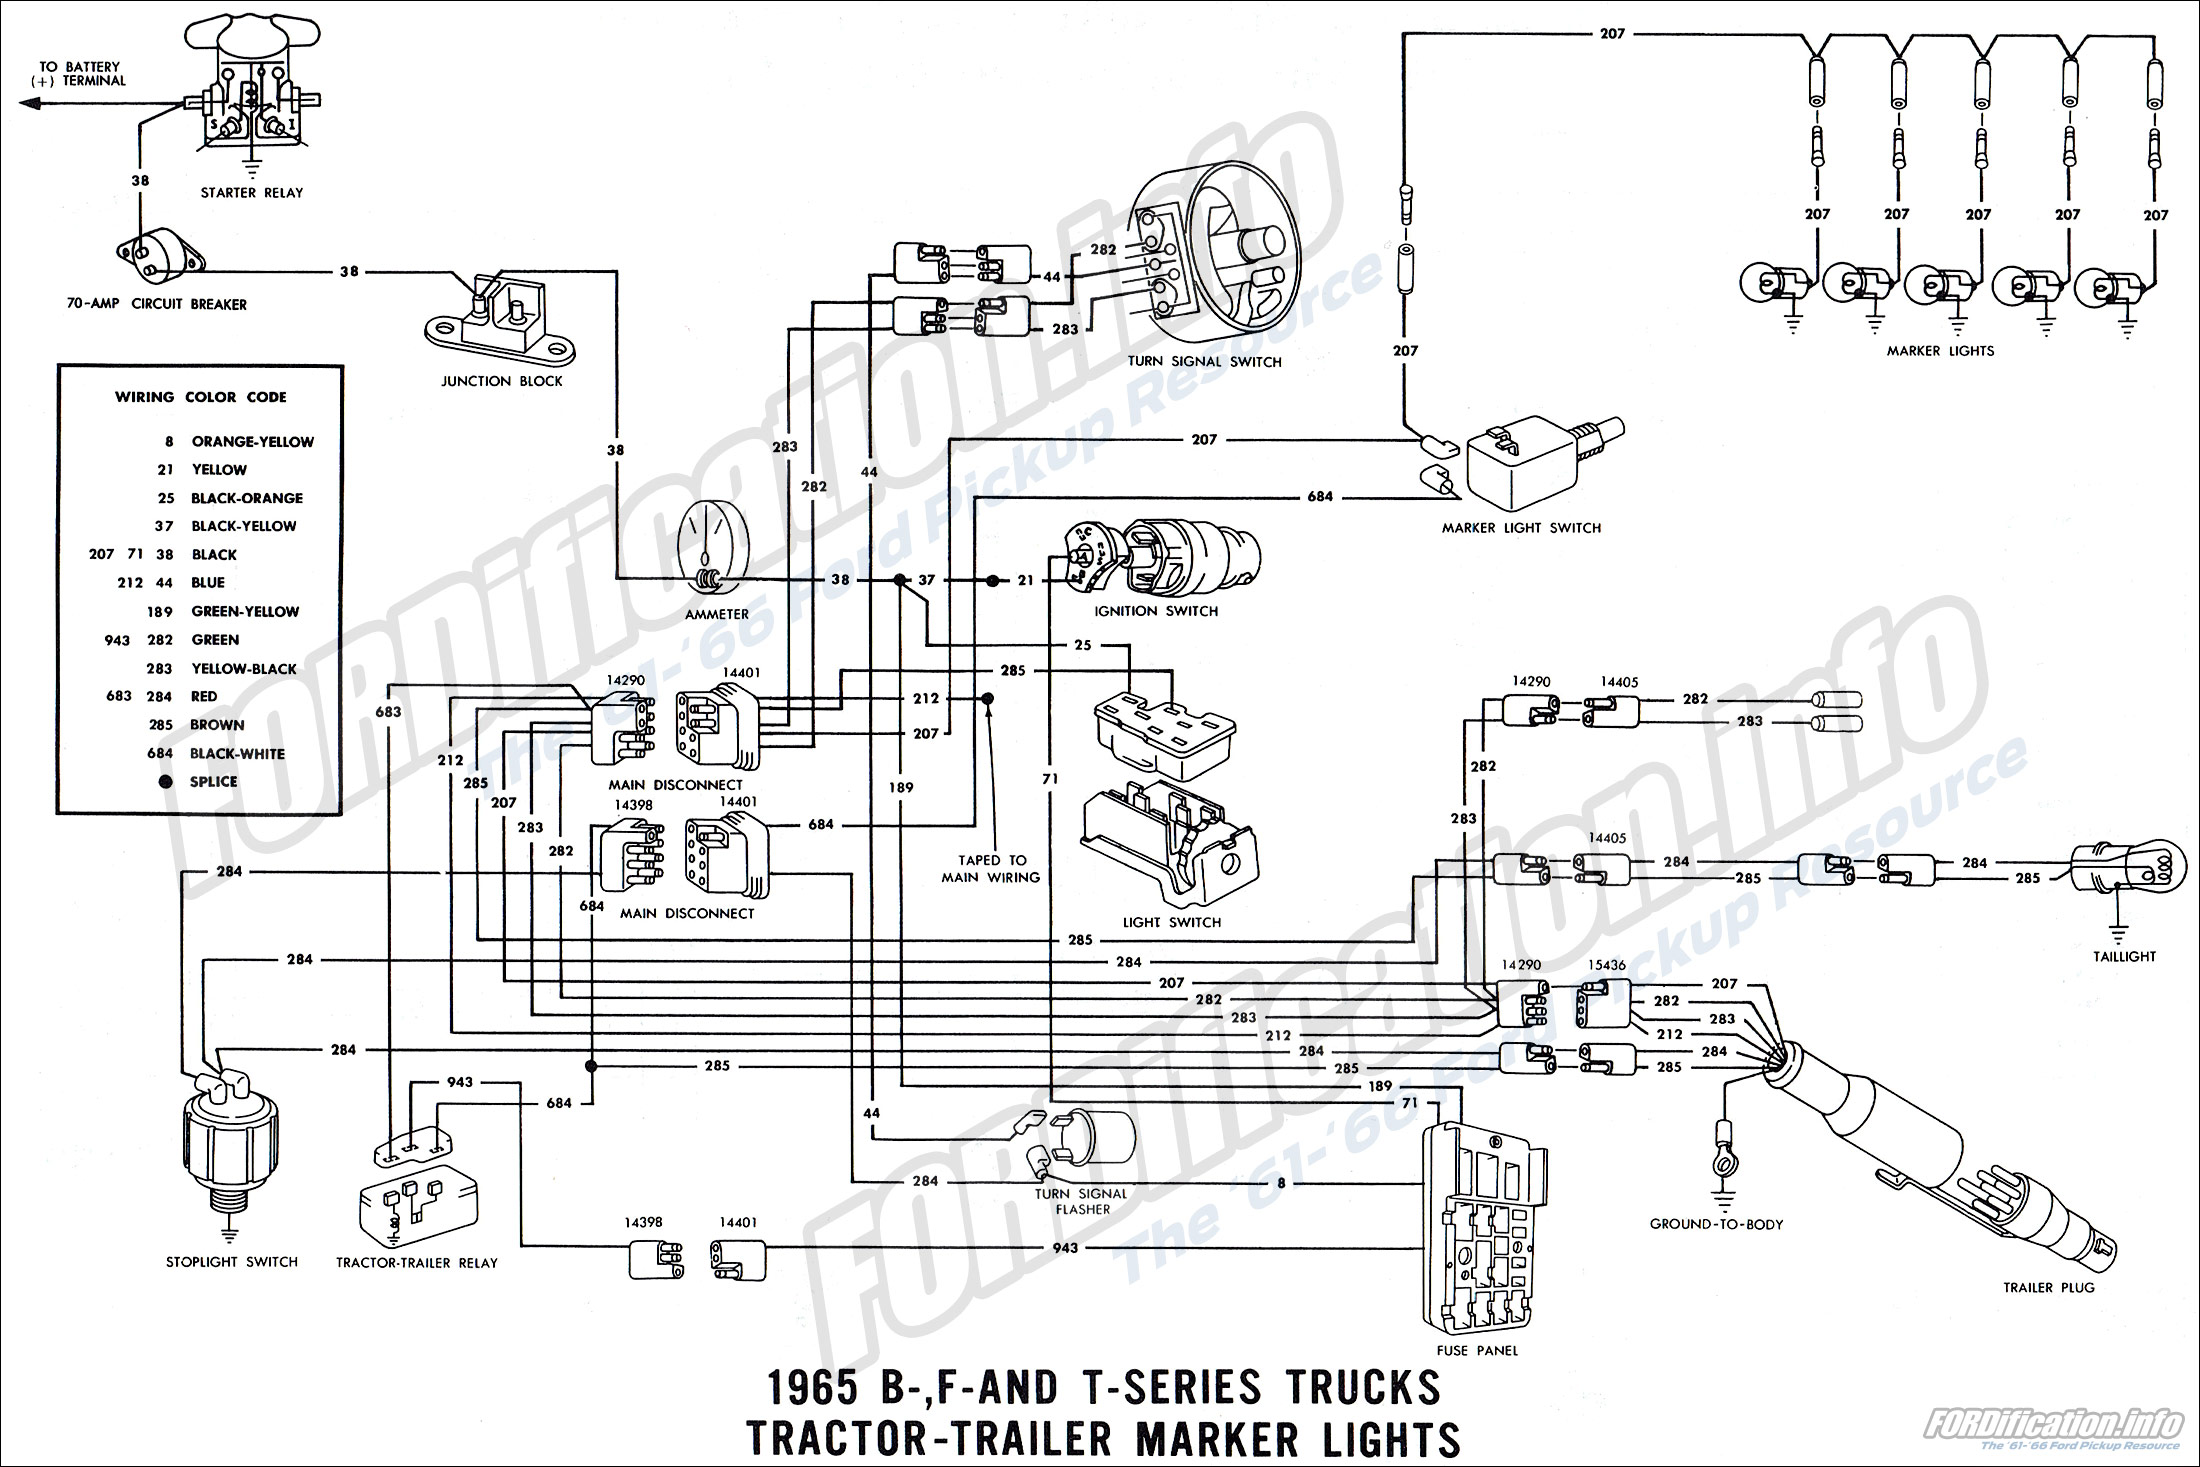 1965 Ford Truck Wiring Diagrams - FORDification.info - The '61-'66 Ford  Pickup Resource  1965 Ford F100 Truck Wiring Diagram    FORDification.info